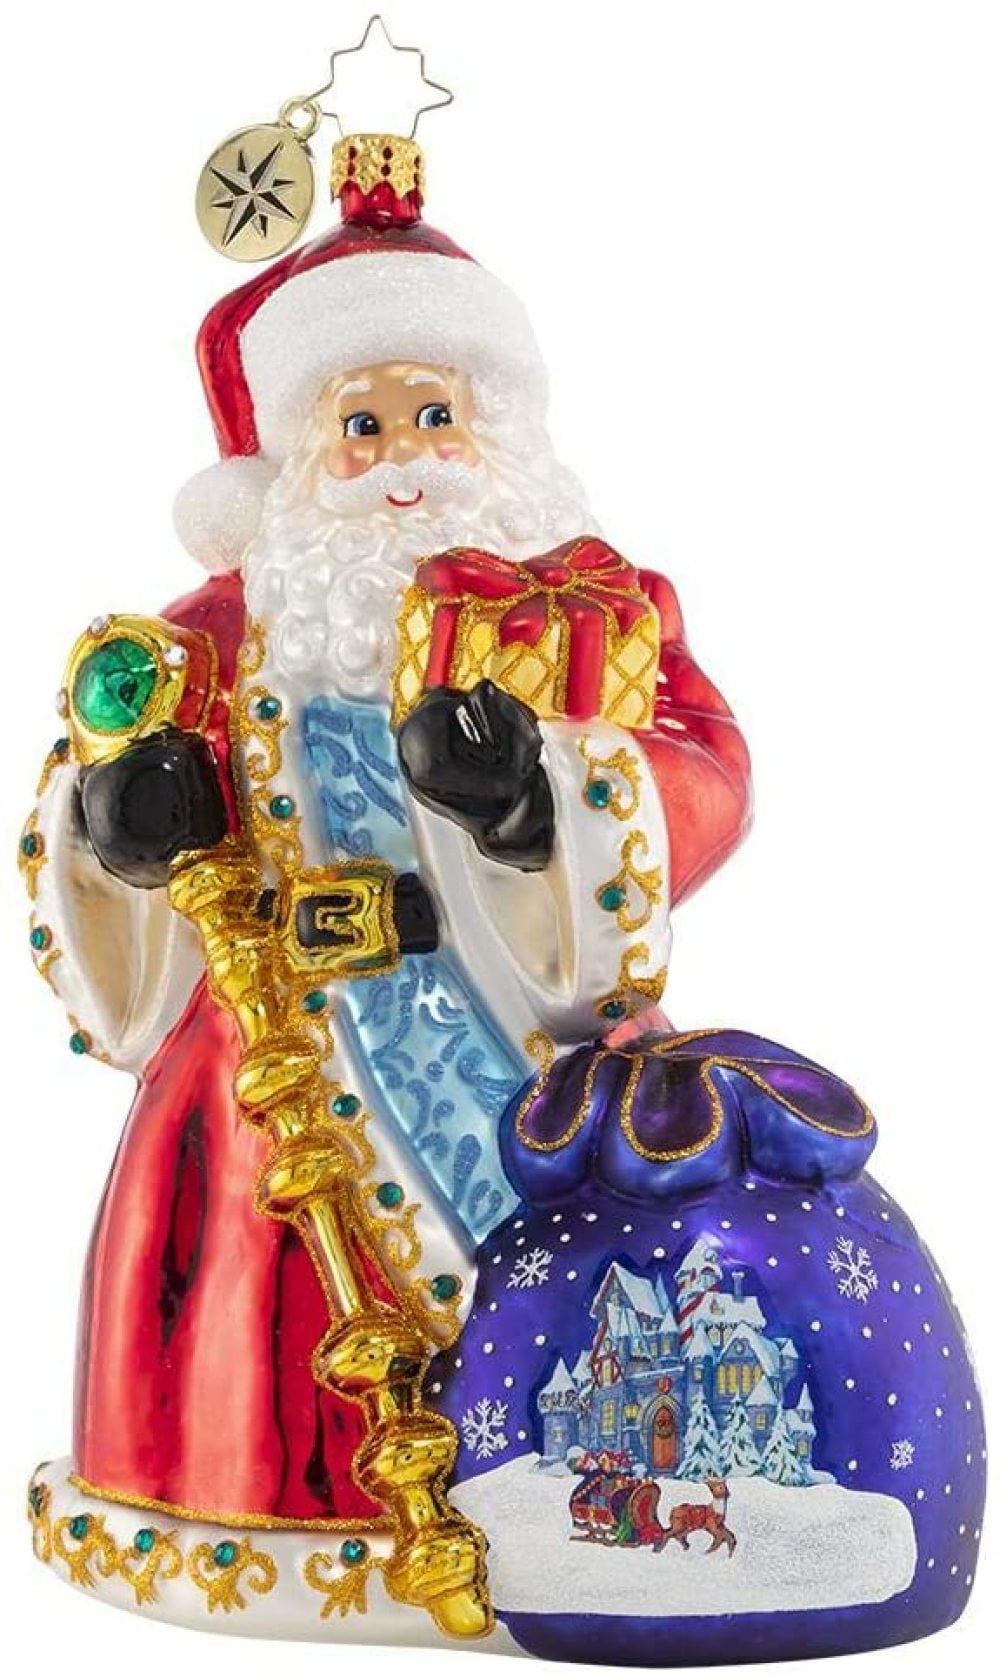 Christopher Radko Hand-Crafted European Glass Christmas Decorative Figural Or... 